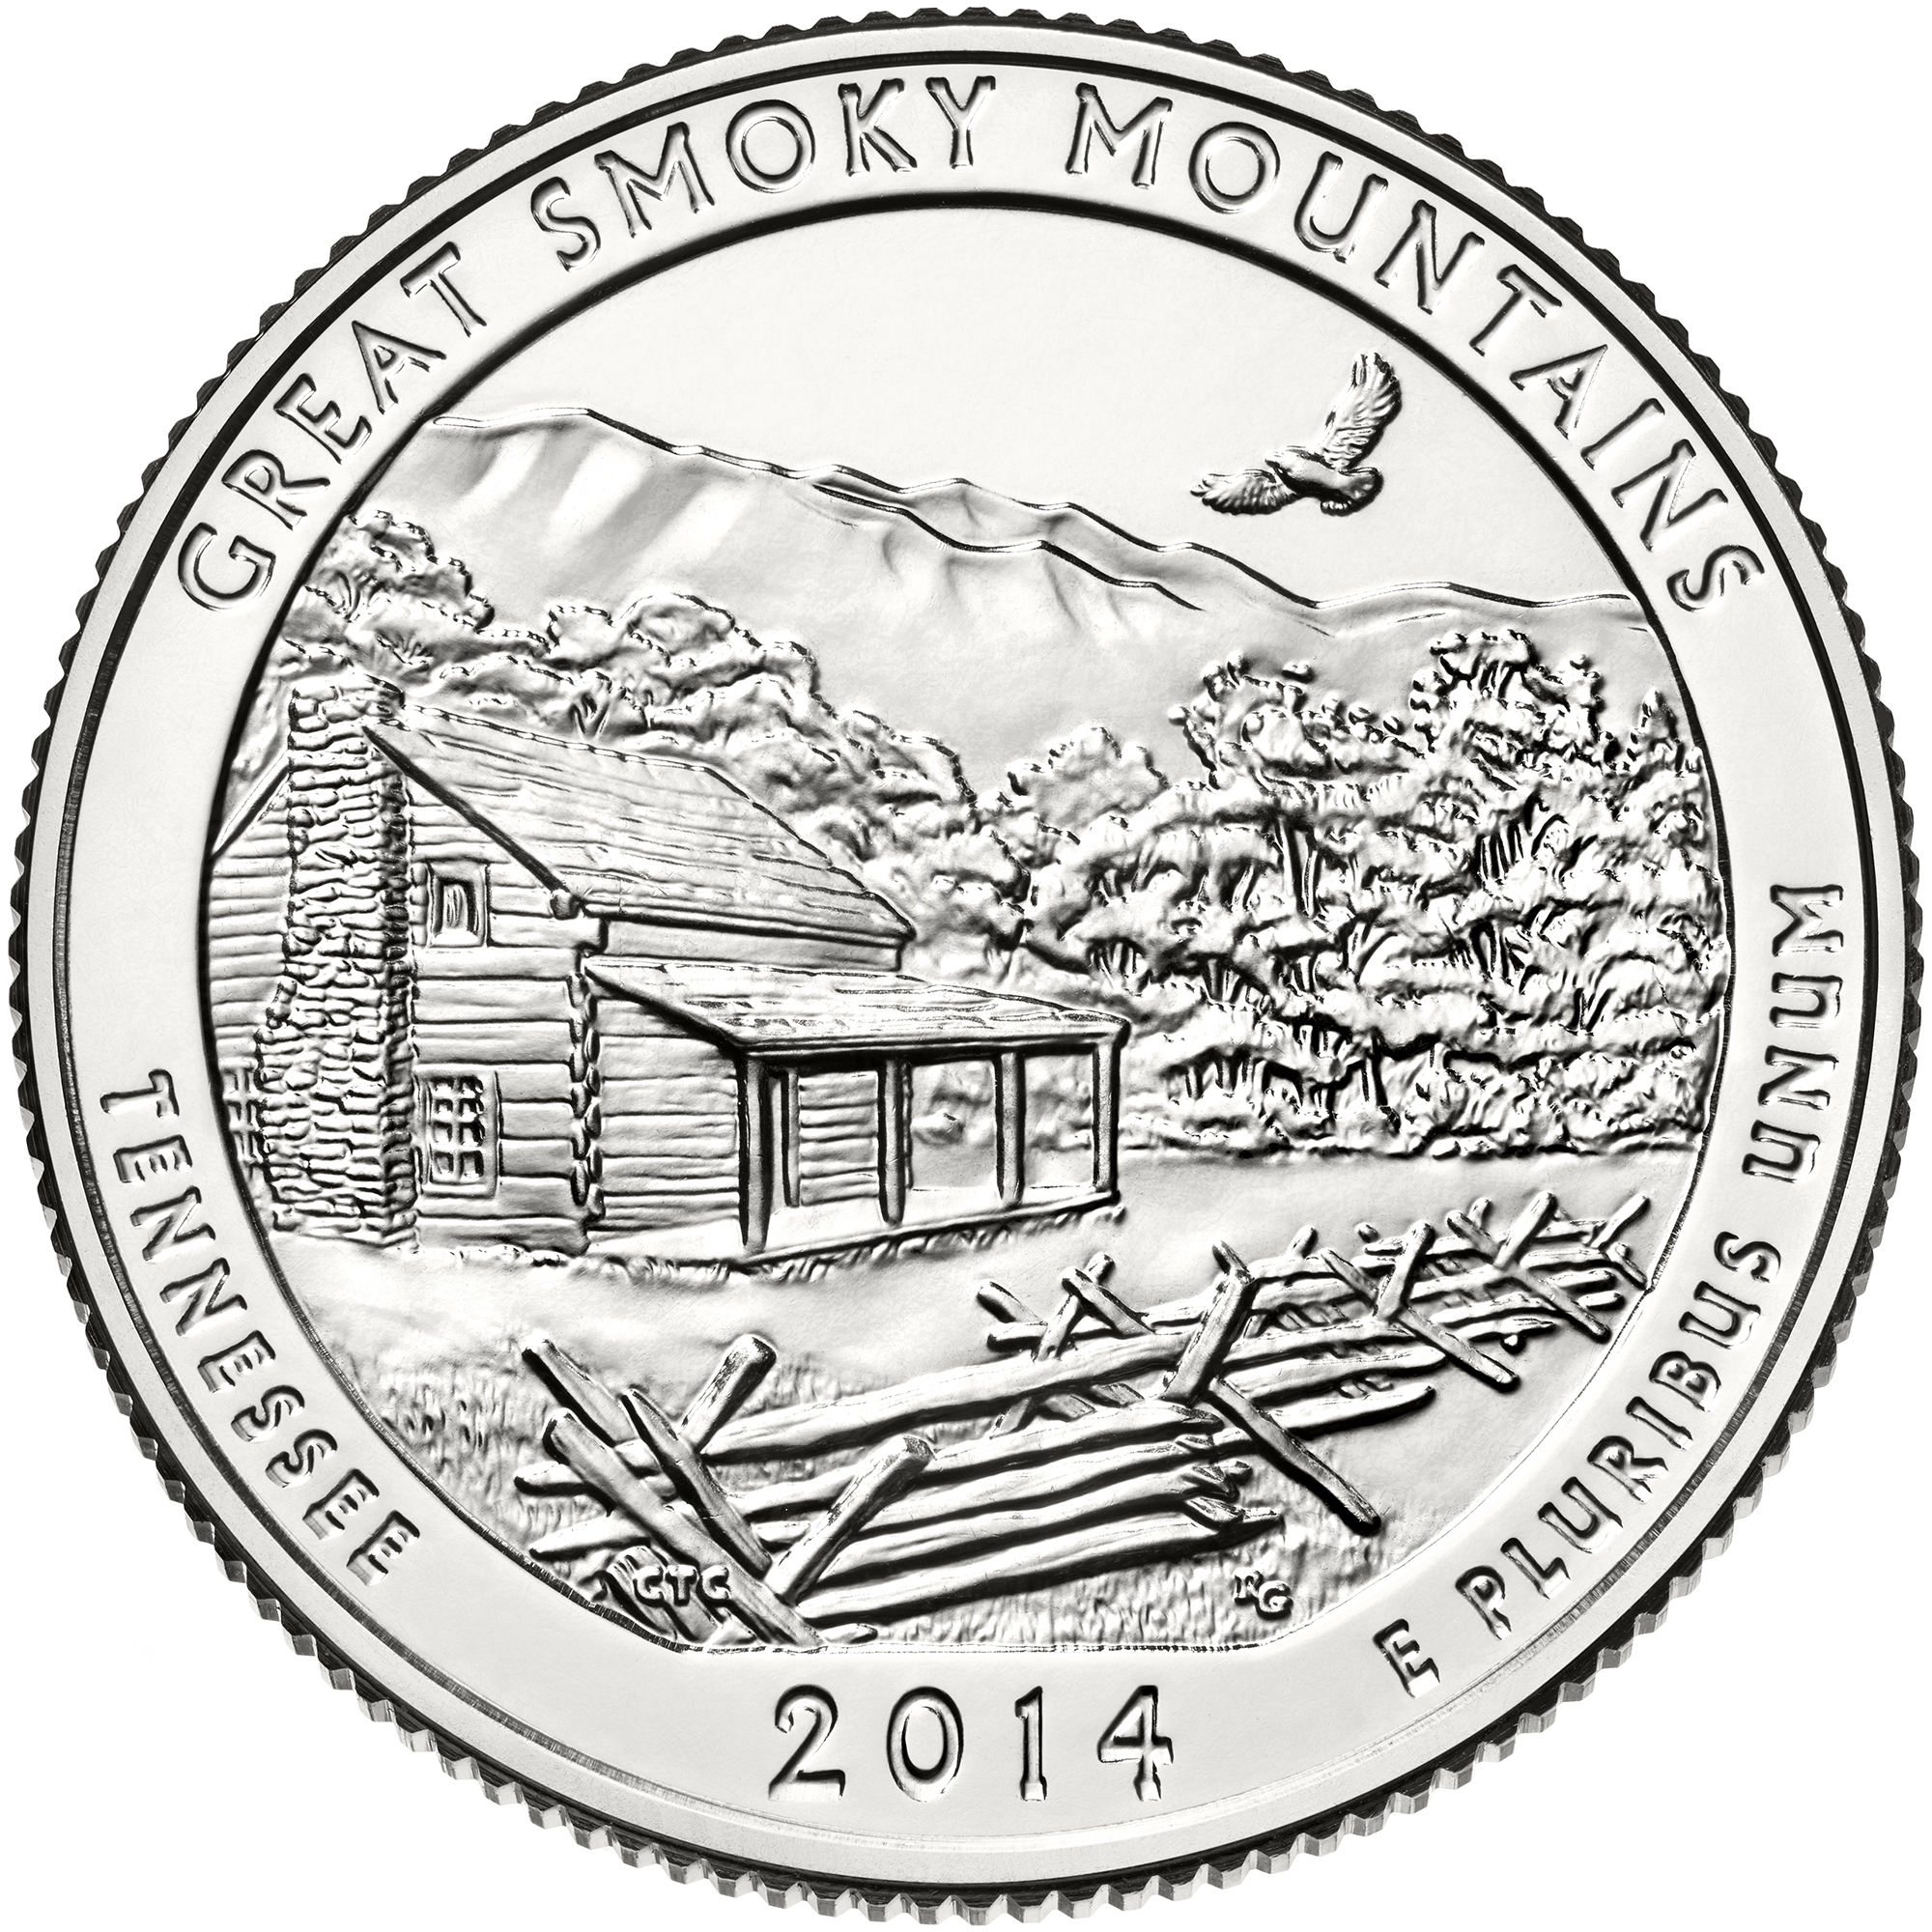 UNITED STATES    25 Cents   2014 D    UNC   SMOKY MOUNTAINS  *